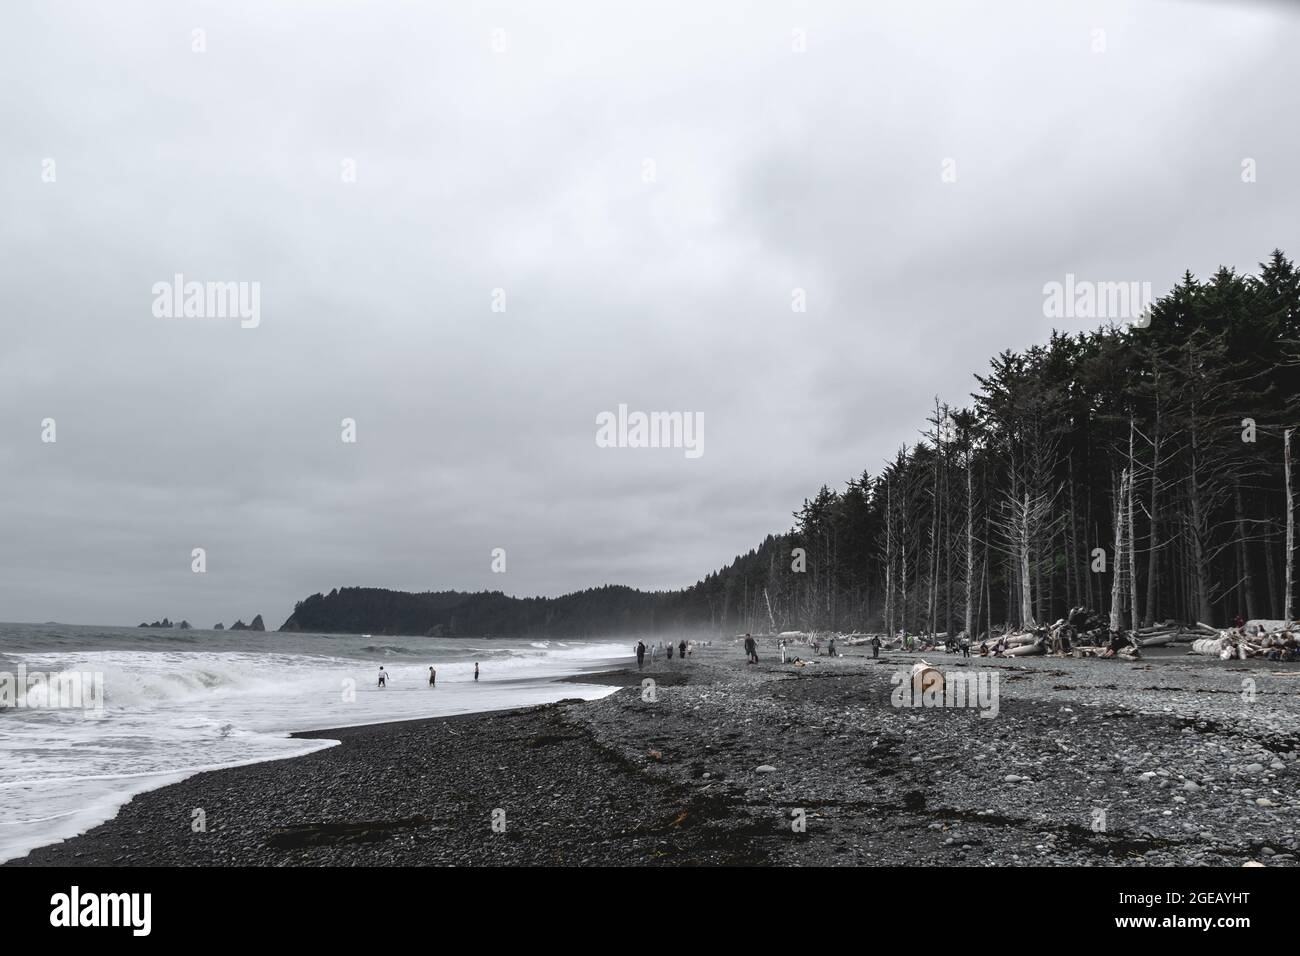 Huge Sitka Spruce trees lining Rialto Beach in Olympic National Park. Stock Photo